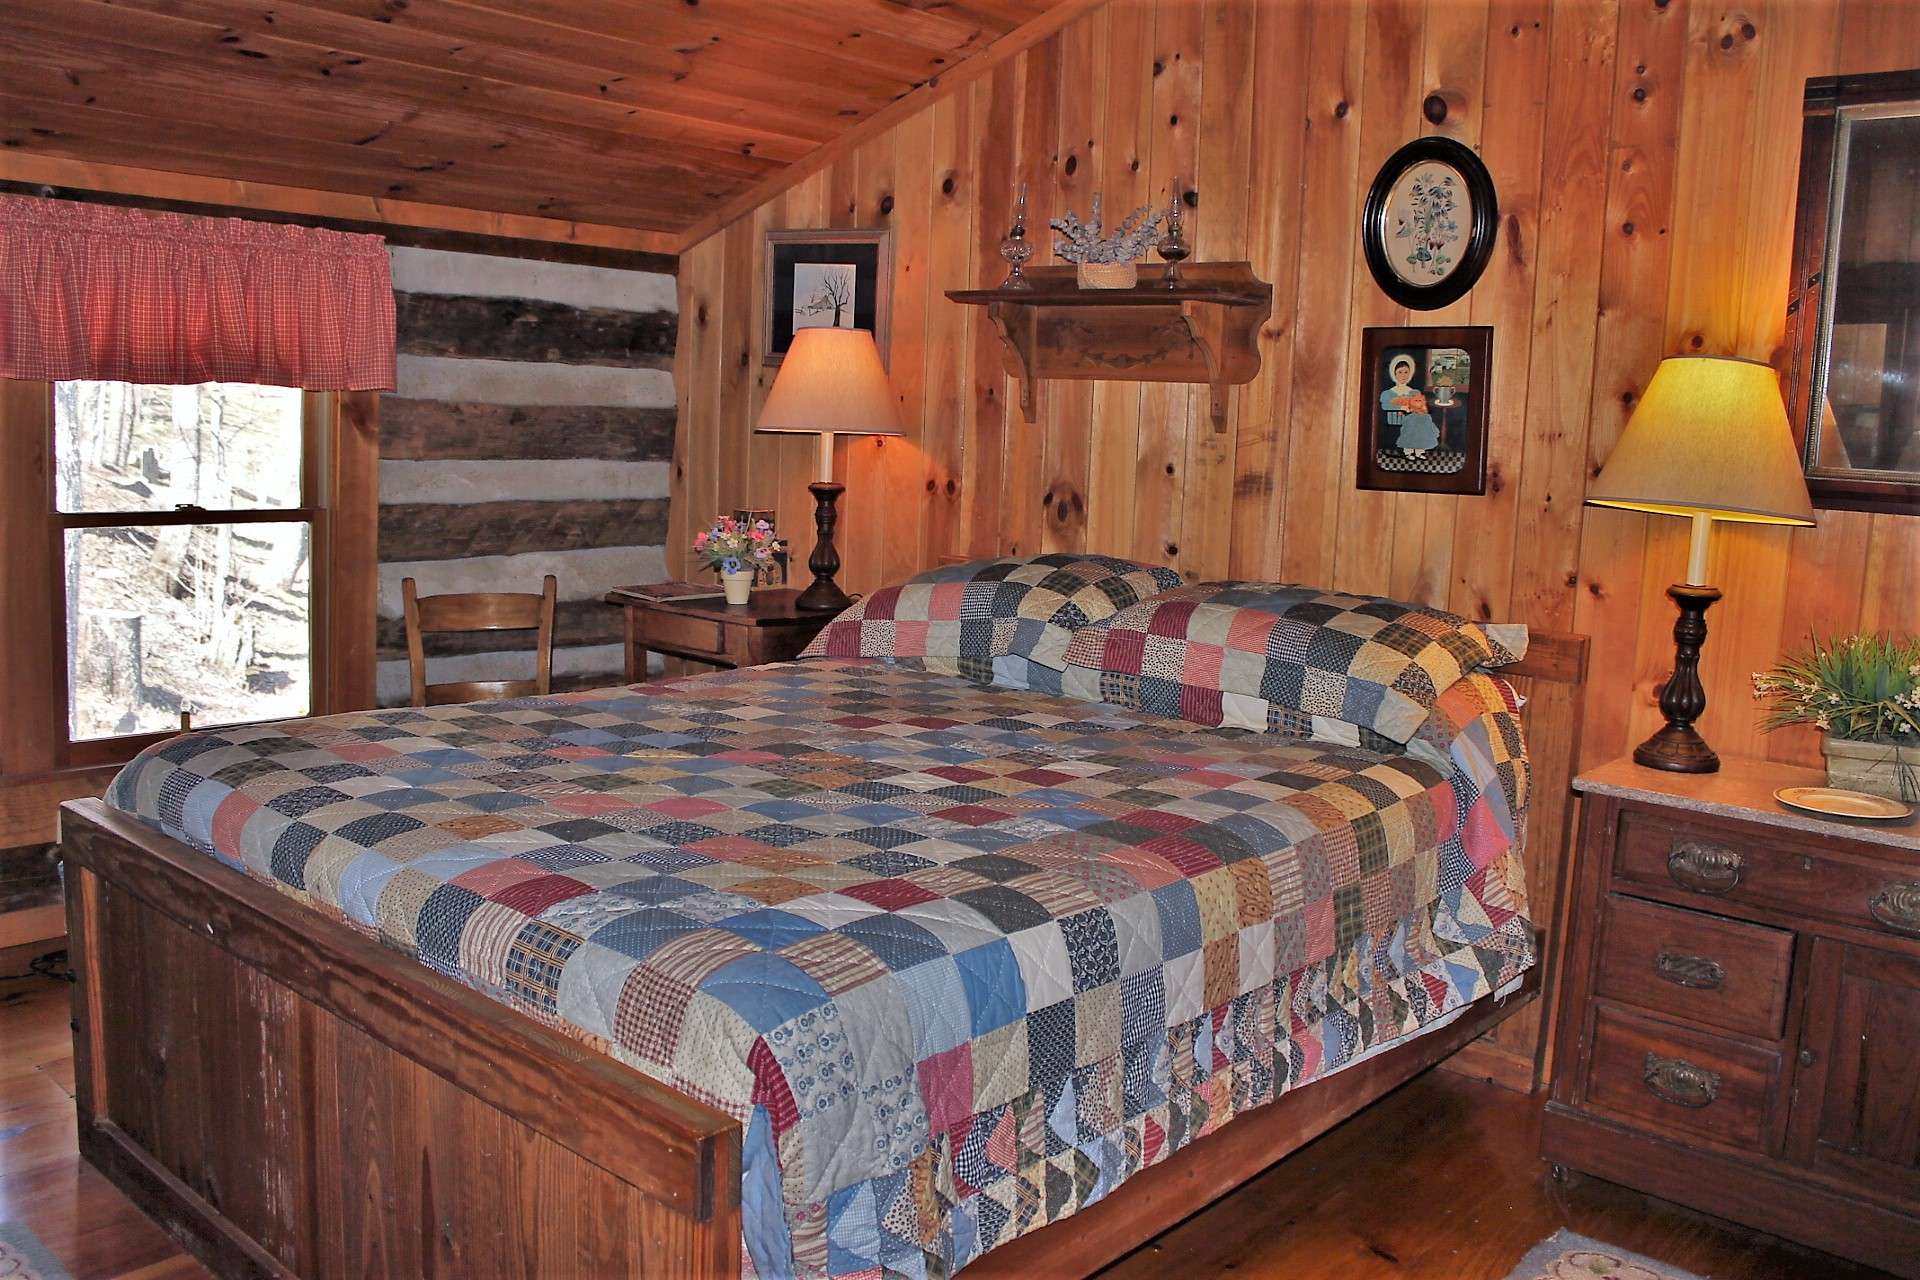 There are two spacious guest bedrooms and another full bath on the upper level.